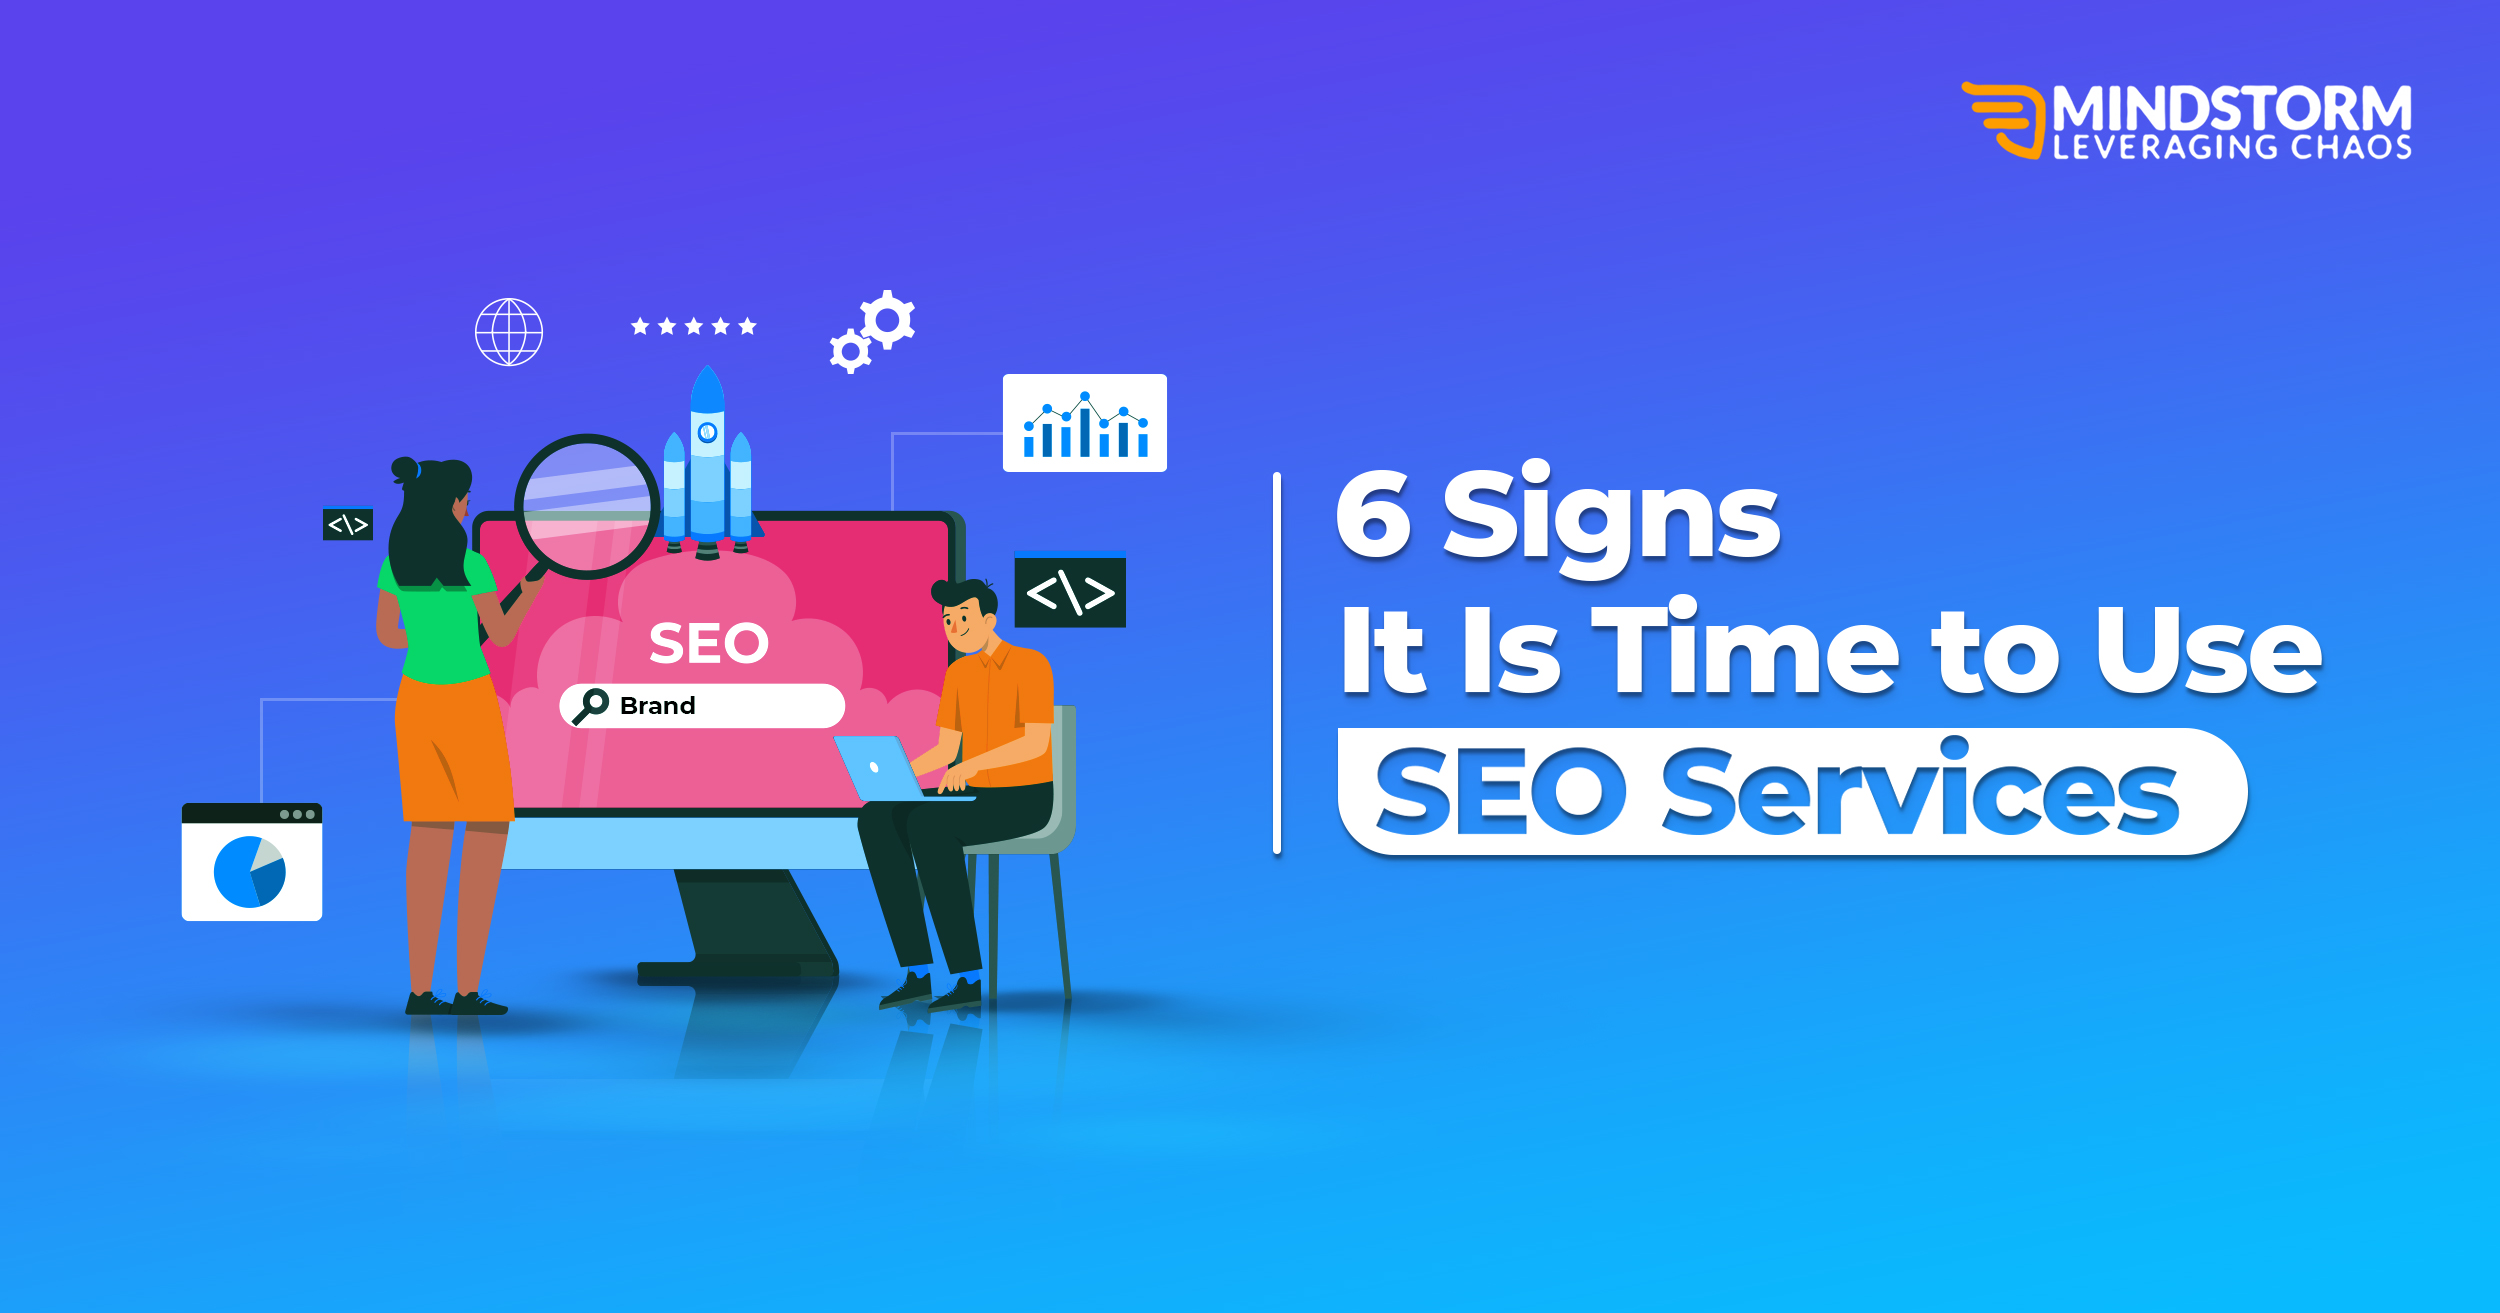 6 Signs It Is Time to Use SEO Services